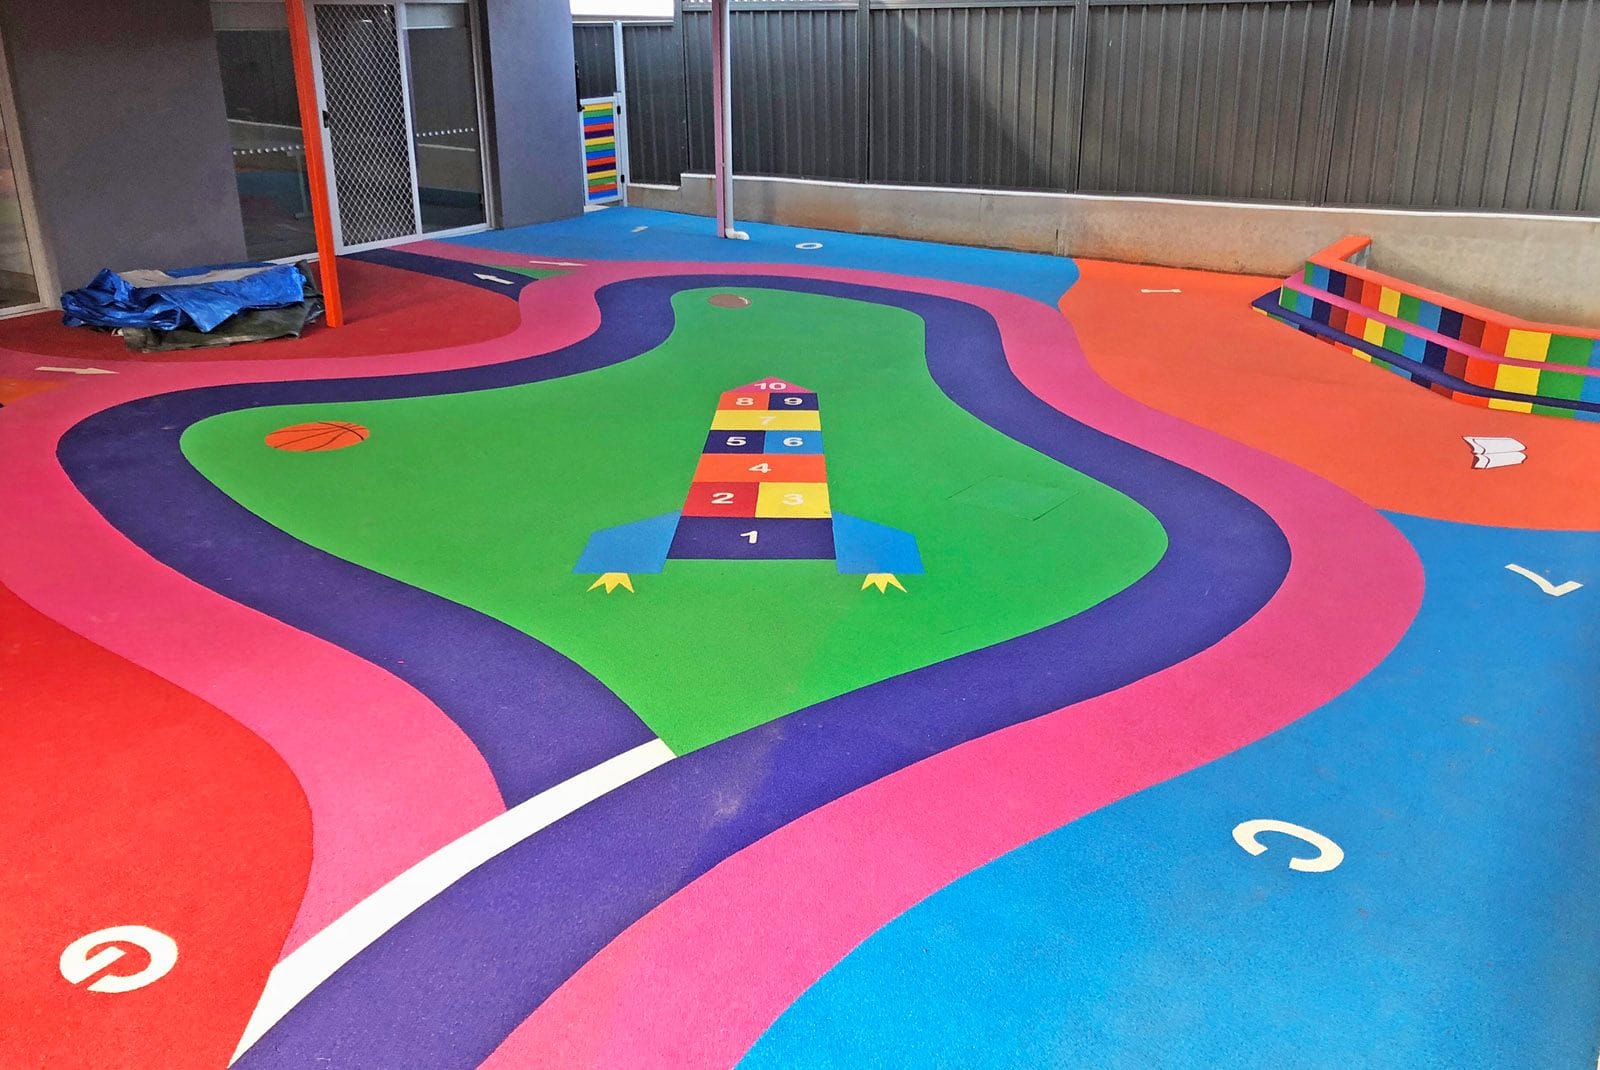 Child Care Centre in Greystains by Synthatech Image -5b9b07269987f